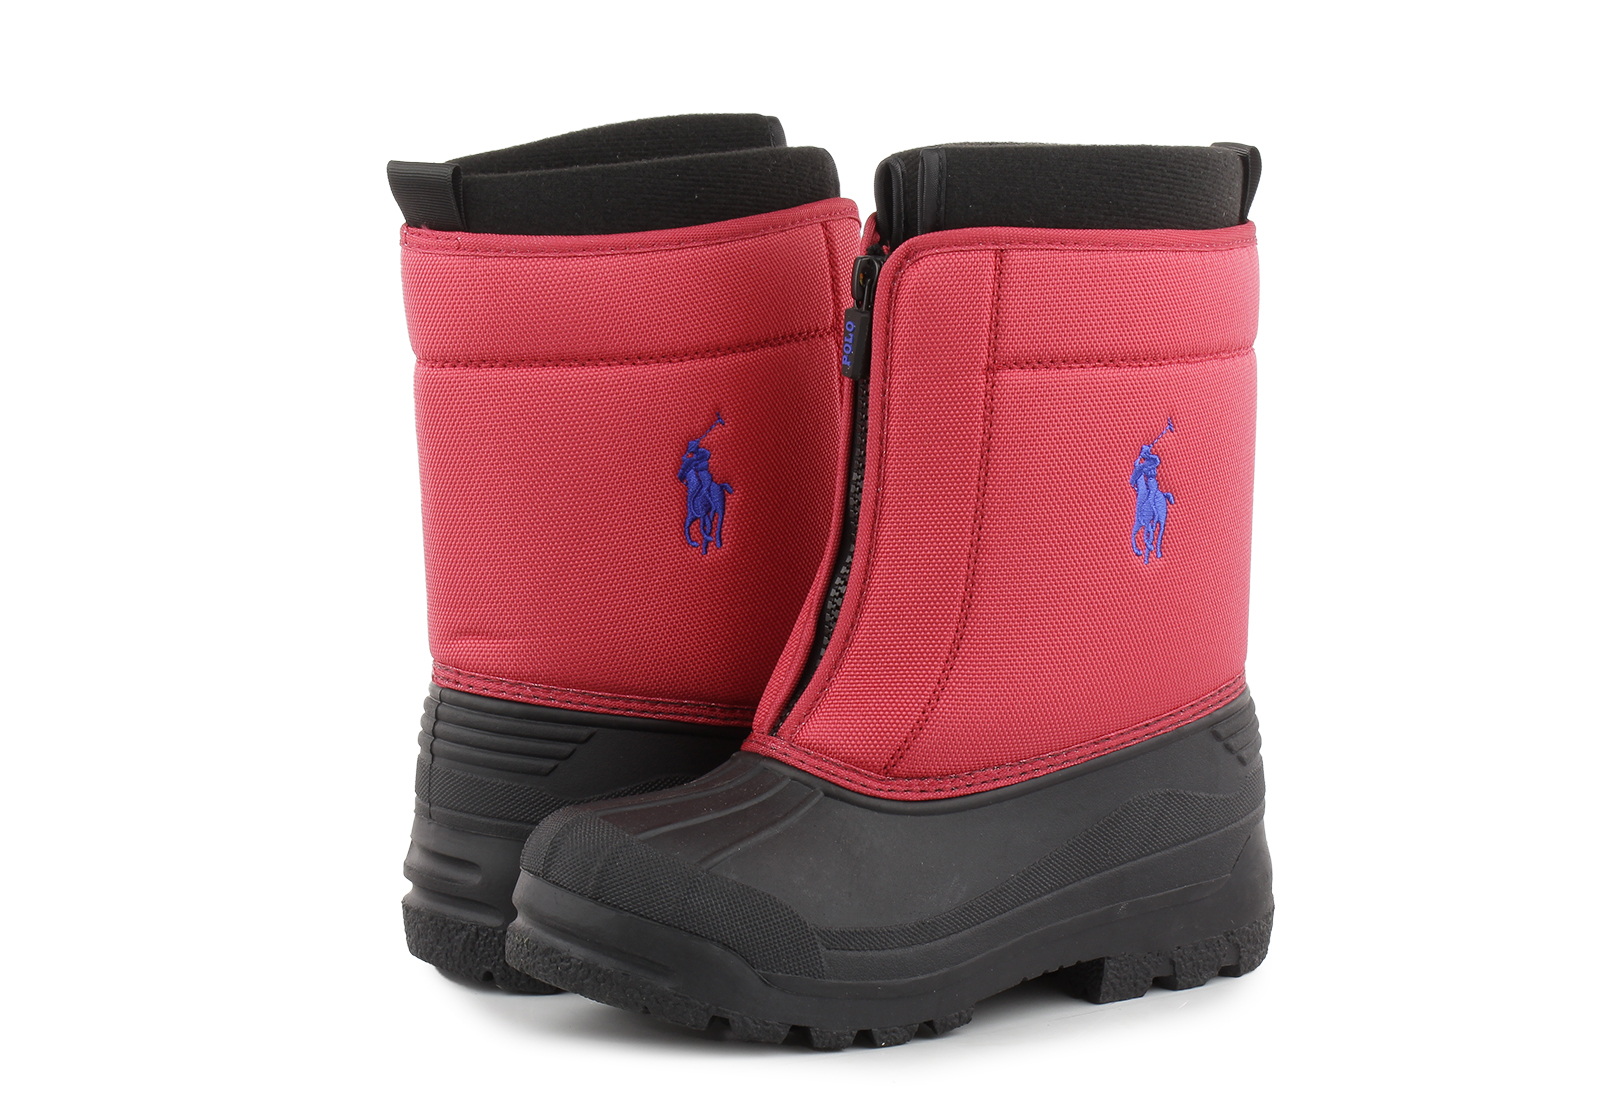 Polo Ralph Lauren Boots - Quilo Zip II - RF103671-C - Online shop for  sneakers, shoes and boots